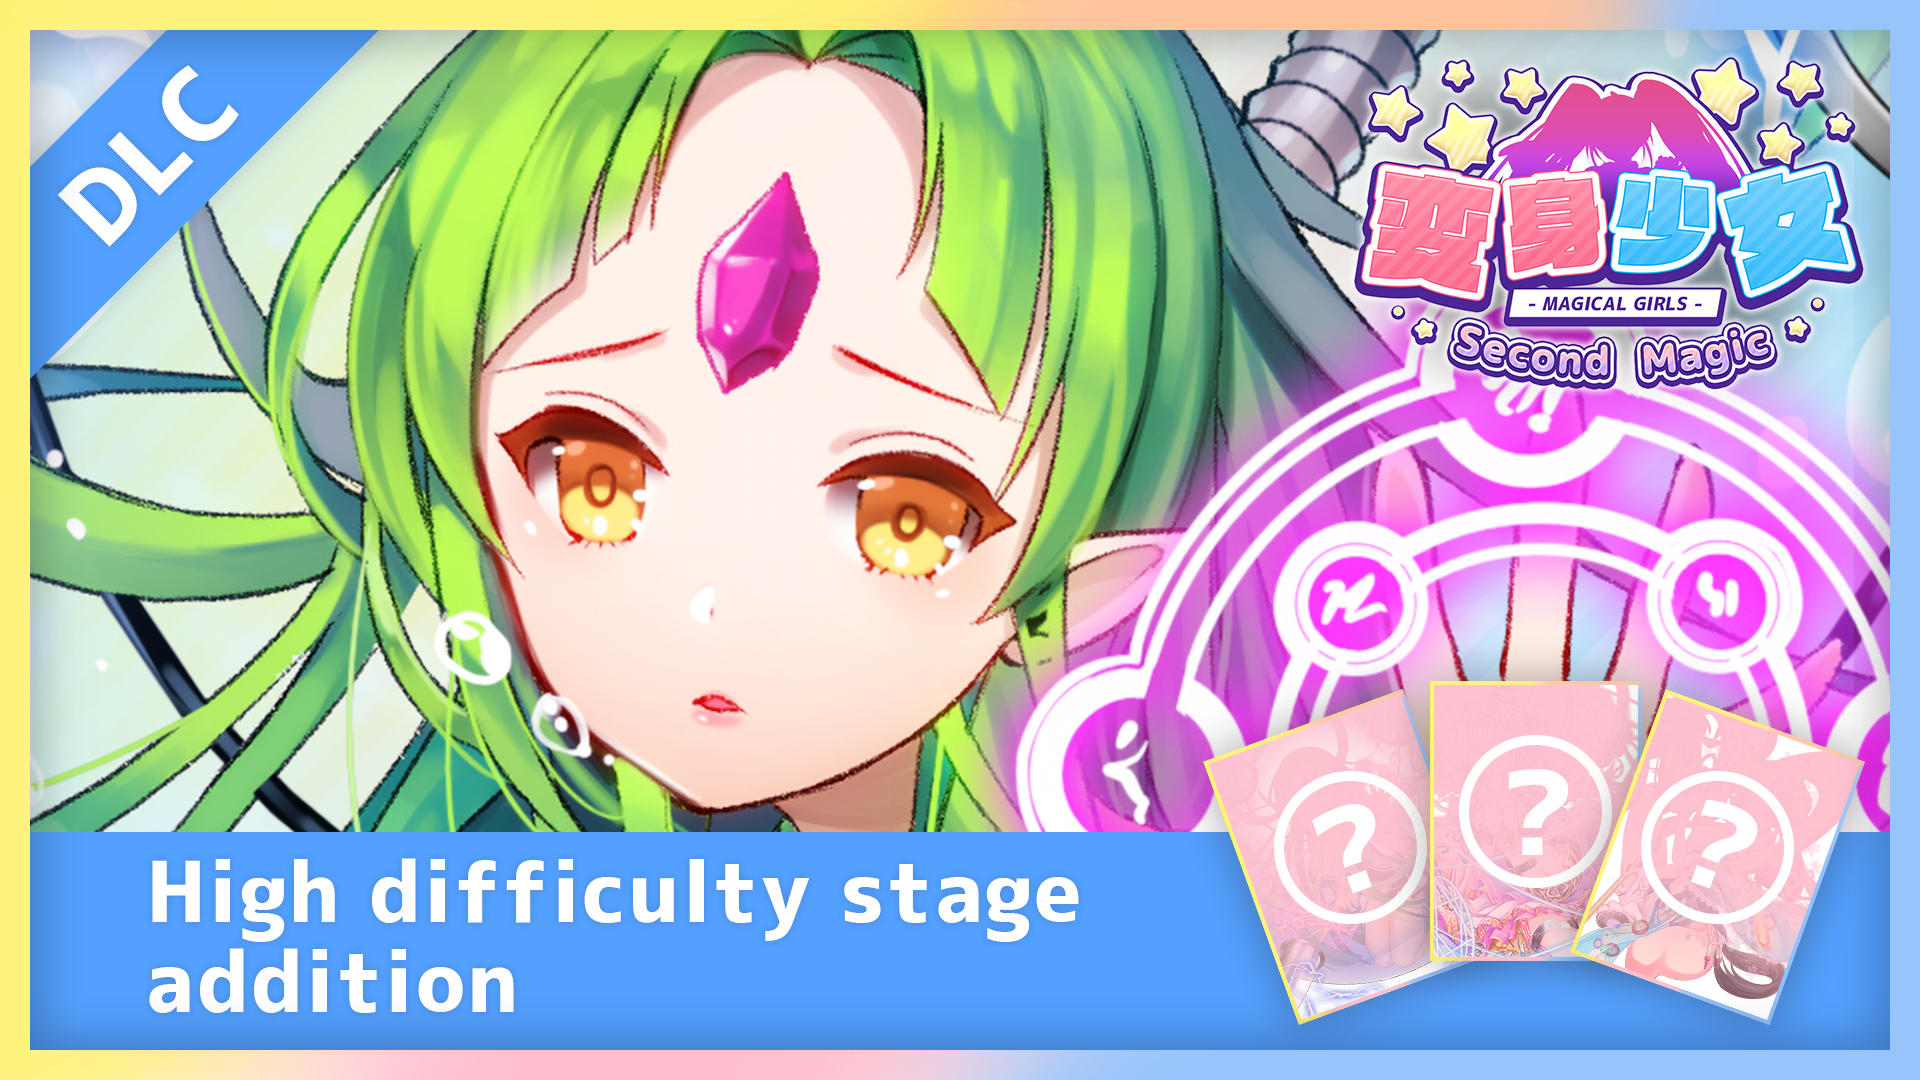 High difficulty stage addition